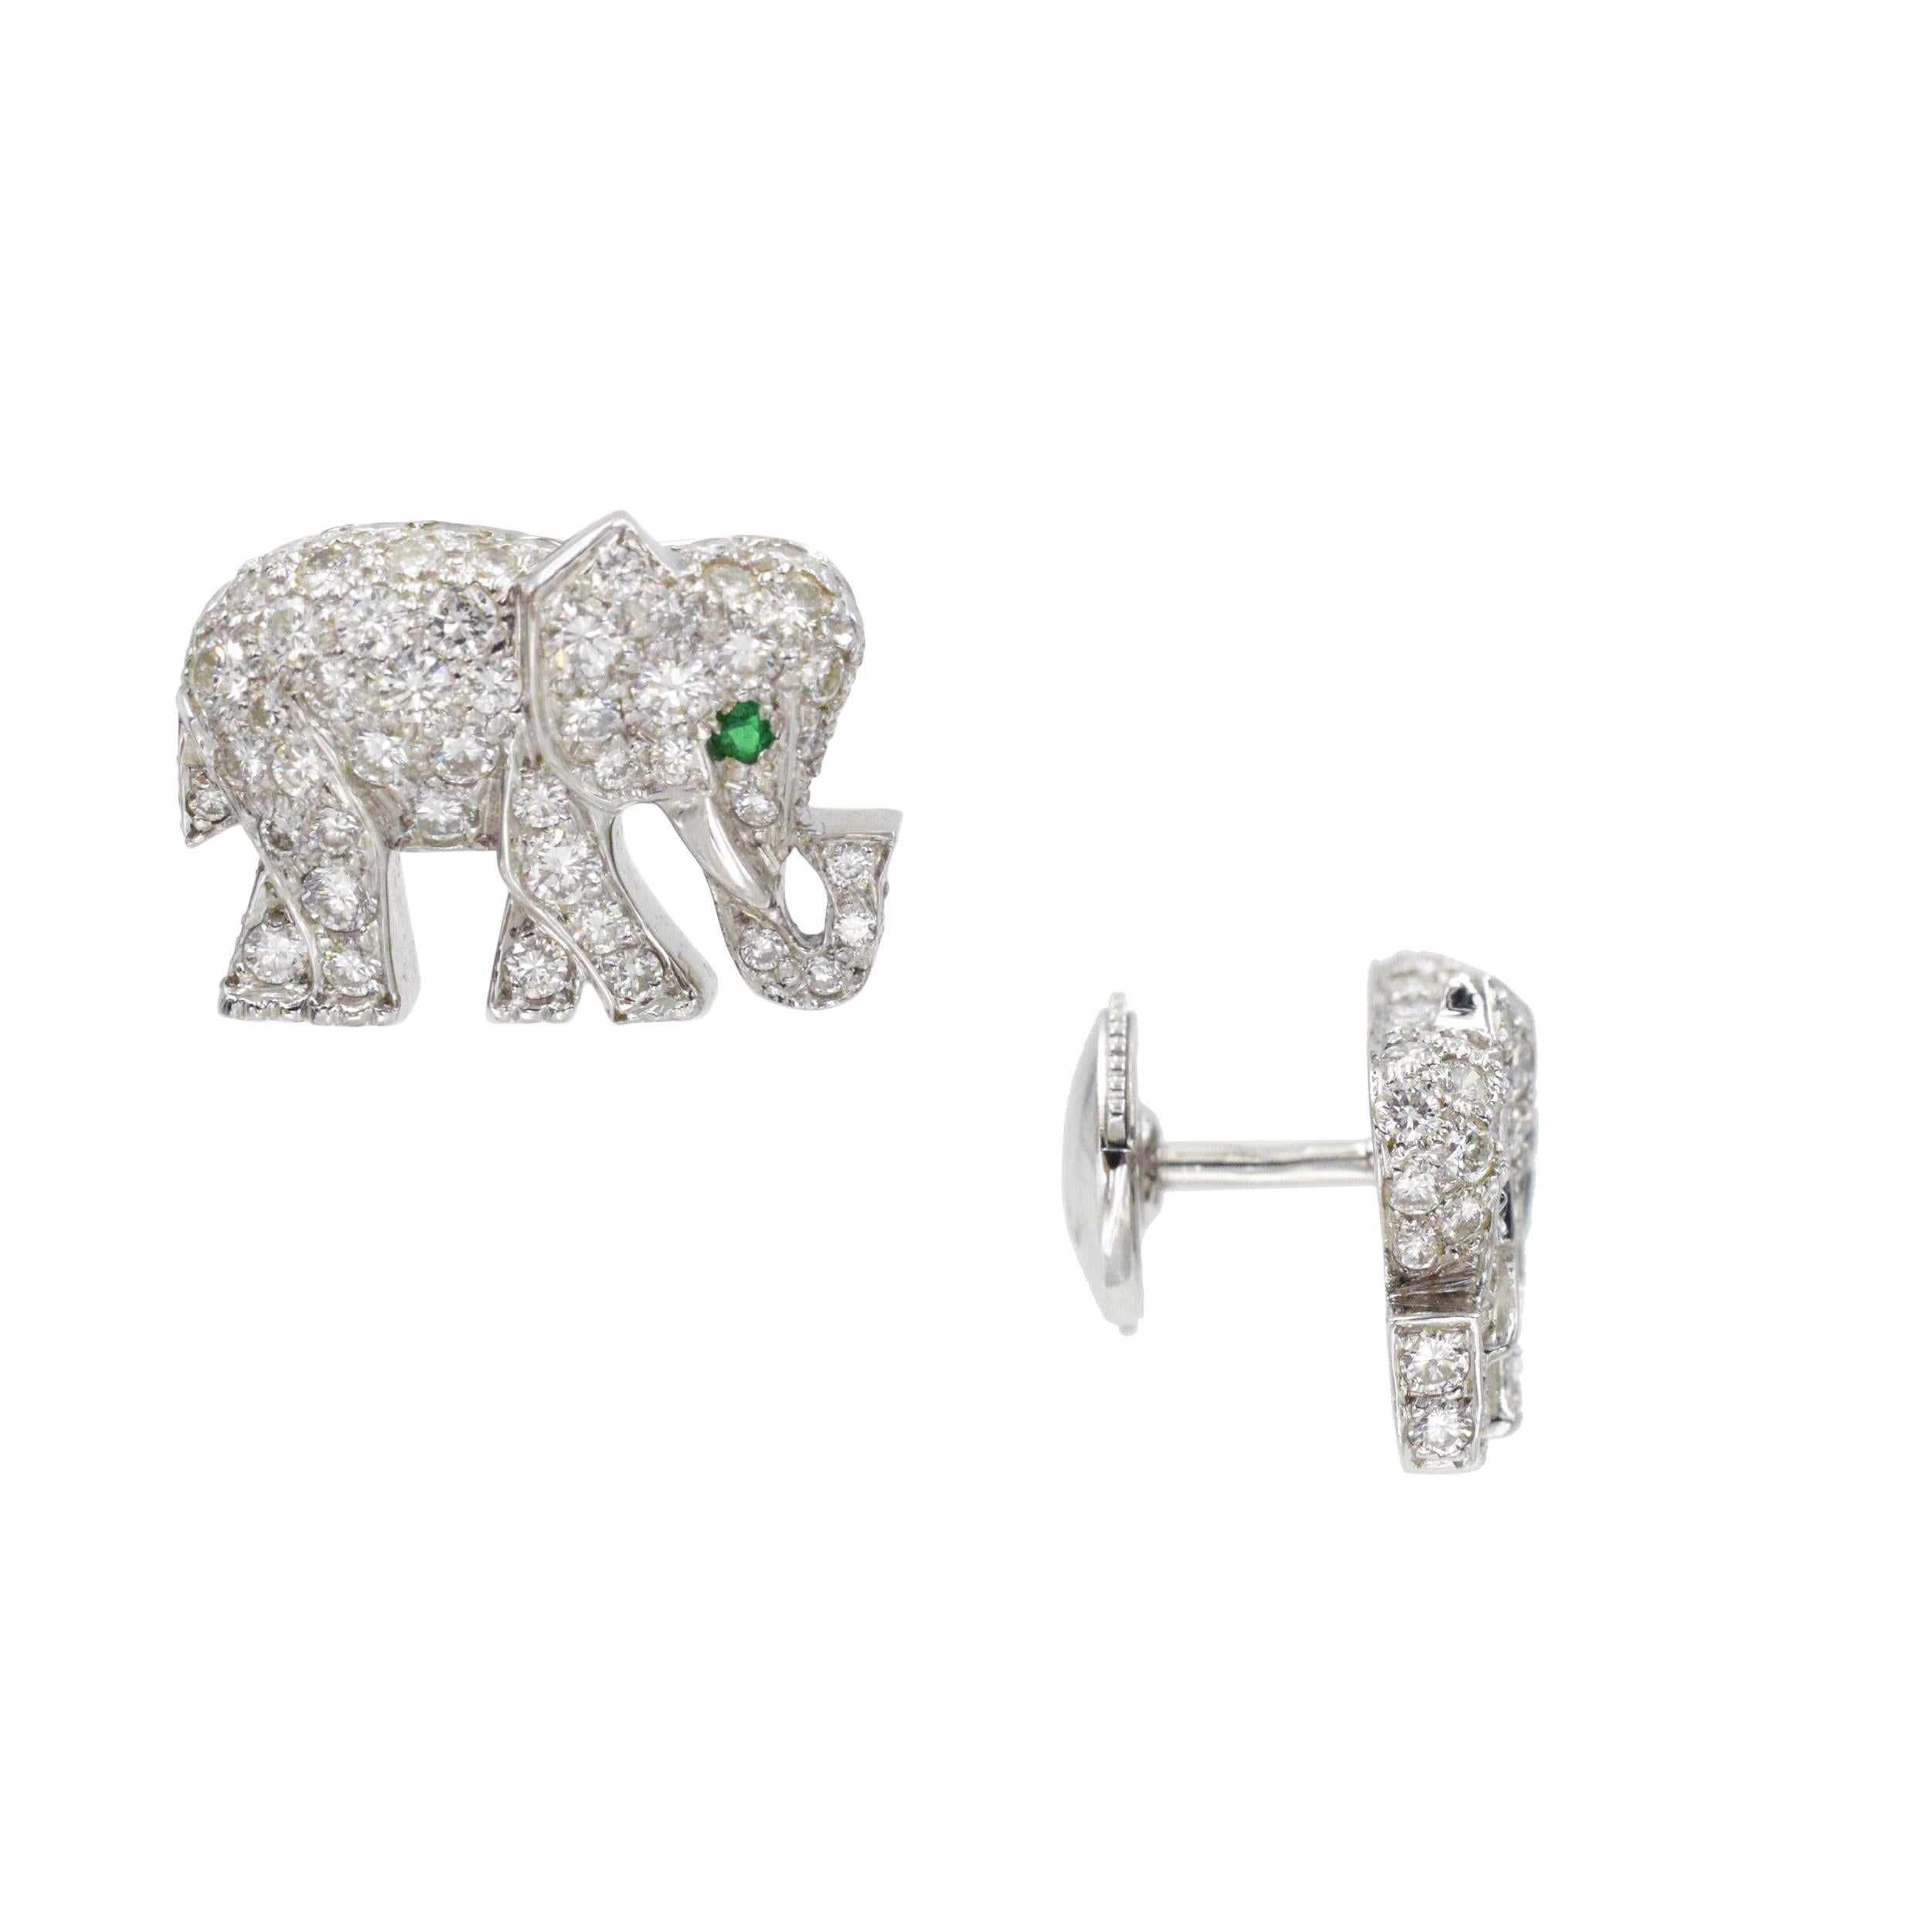 Cartier Diamond and Emerald Elephant Brooch and Earrings Set In Platinum. 4